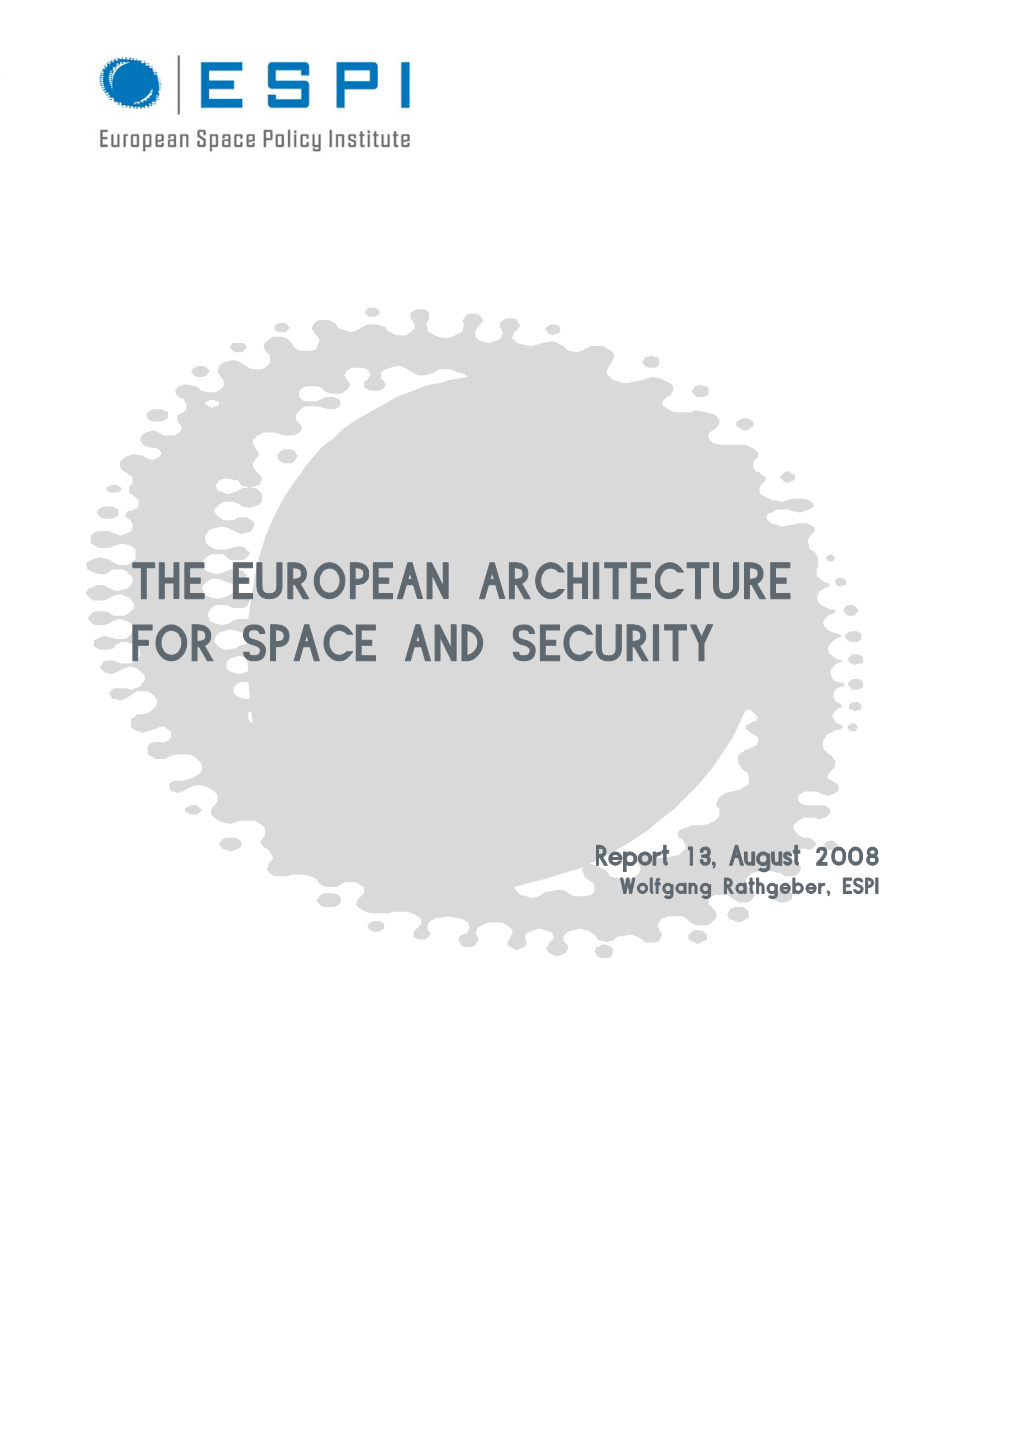 The European Architecture for Space and Security